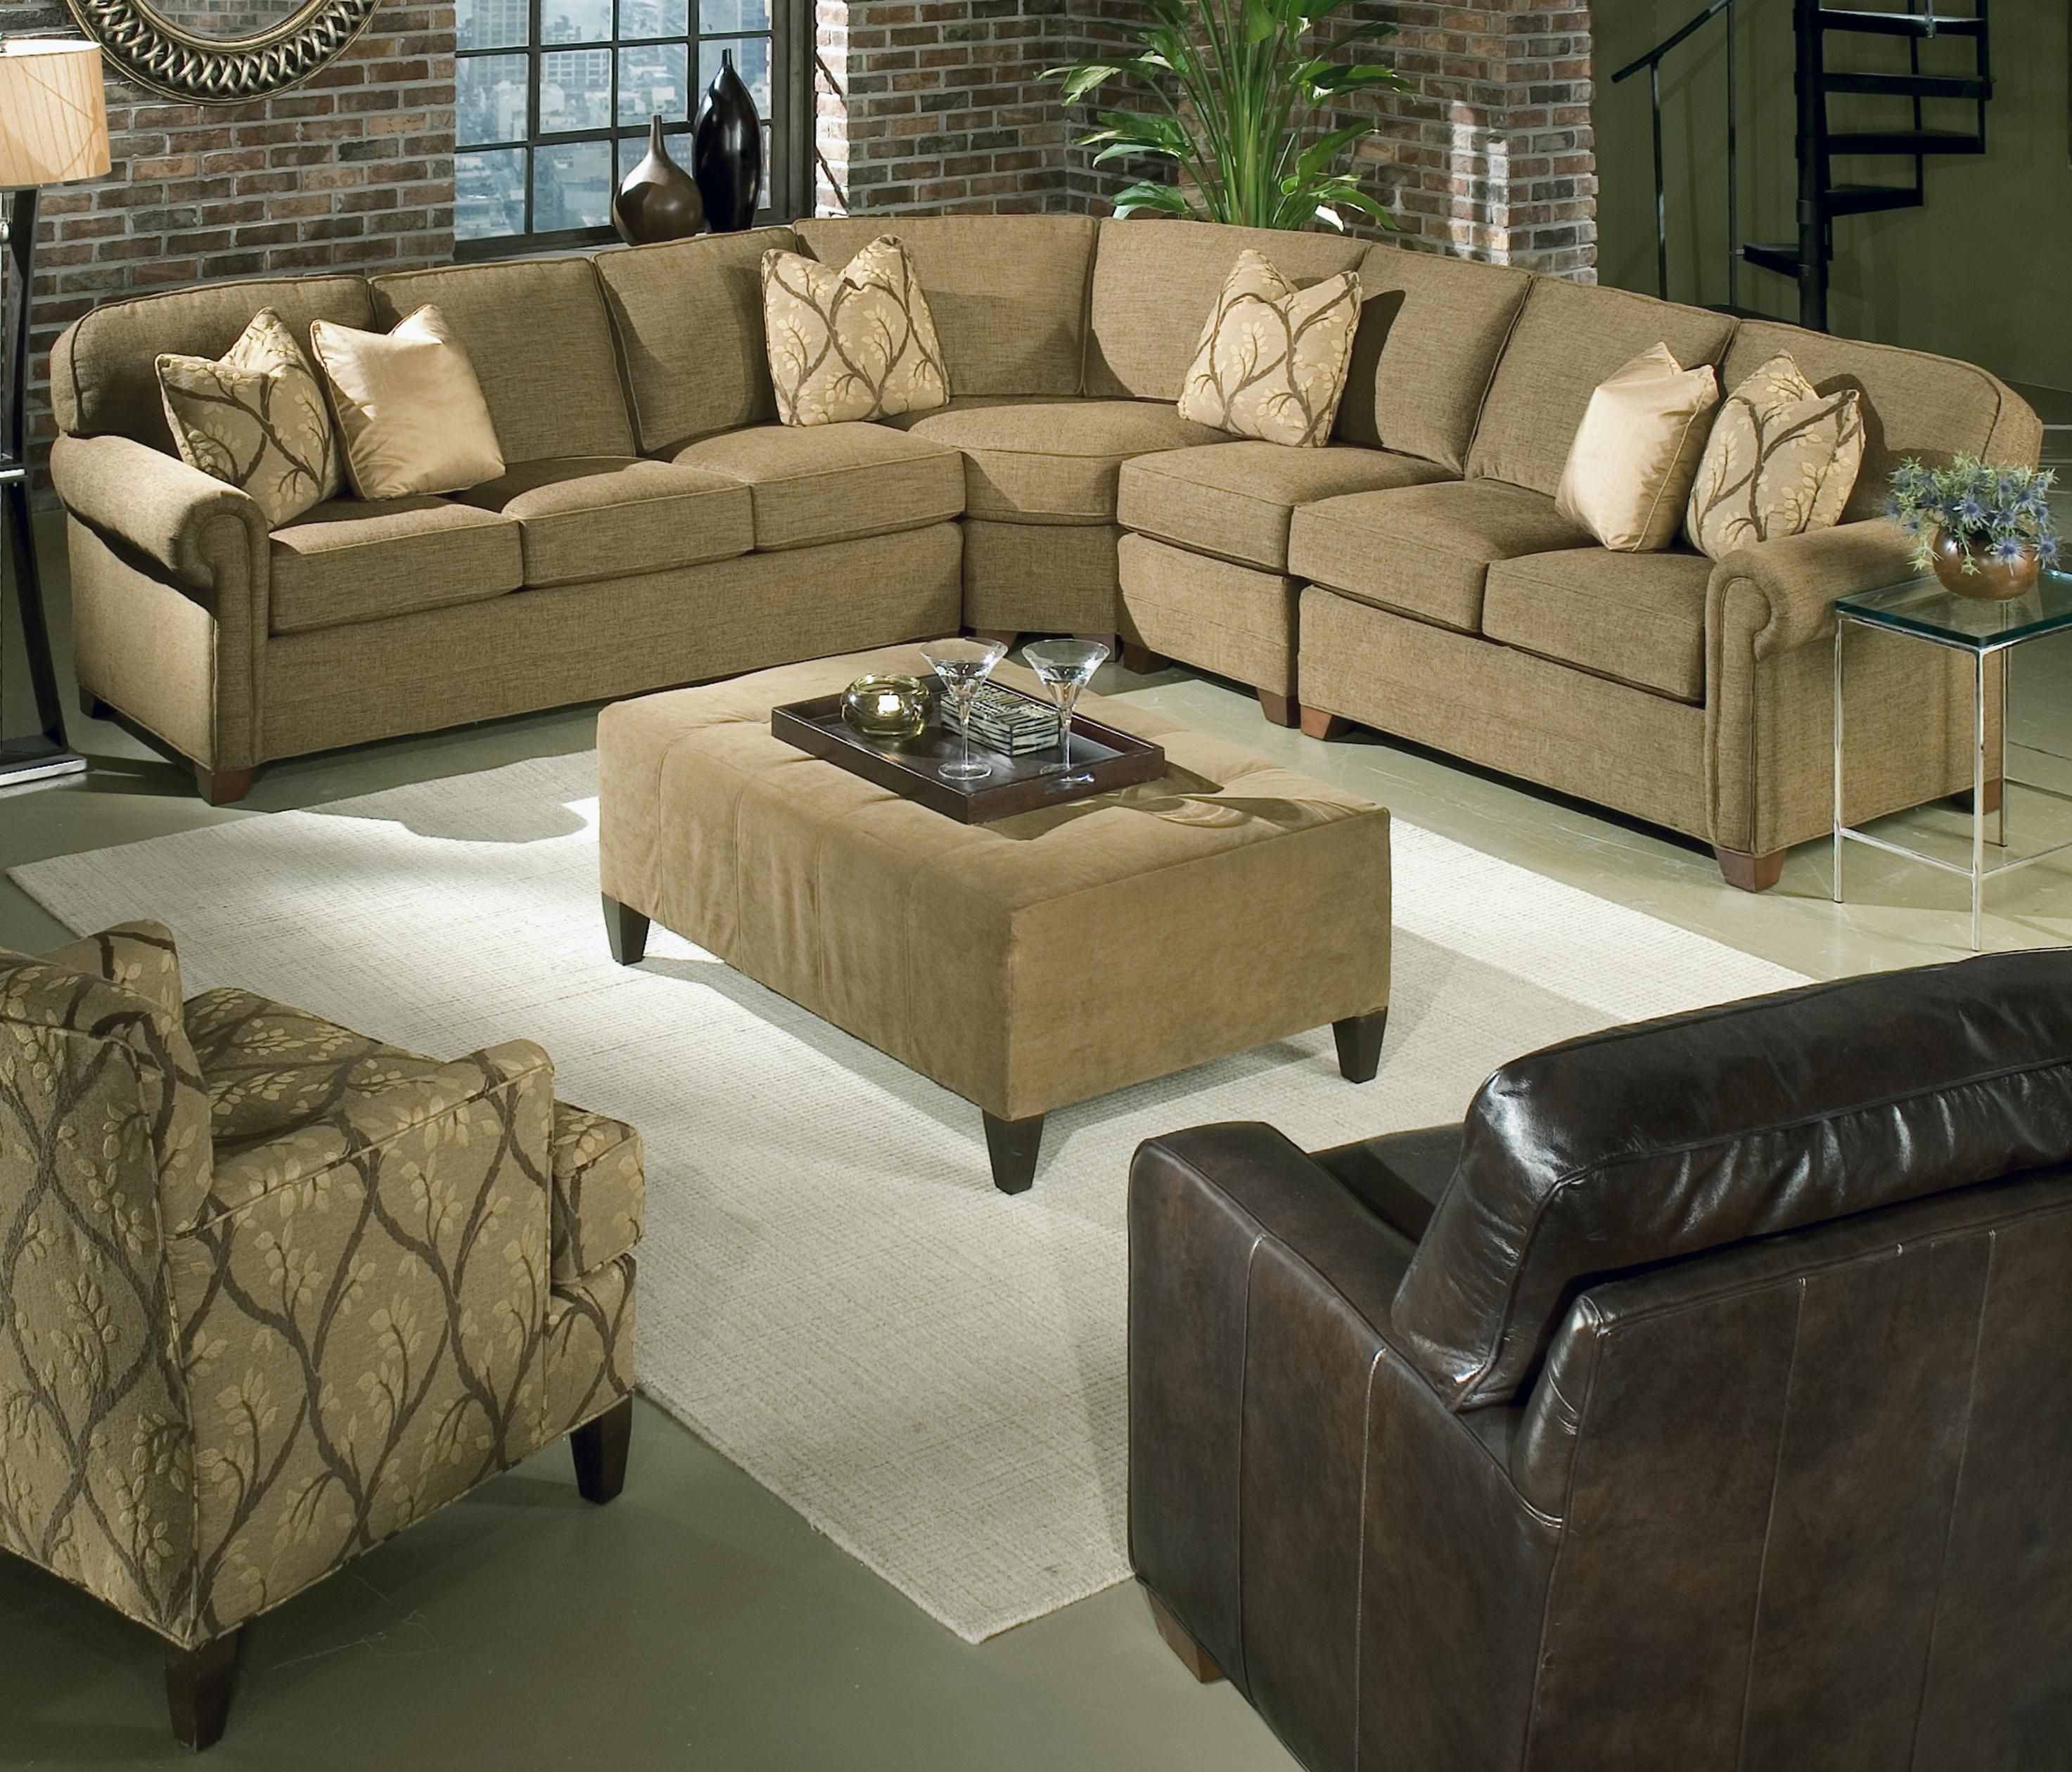 Brighton 4 Piece Sectionalking Hickory | All Things Softball Within Johnson City Tn Sectional Sofas (View 1 of 10)